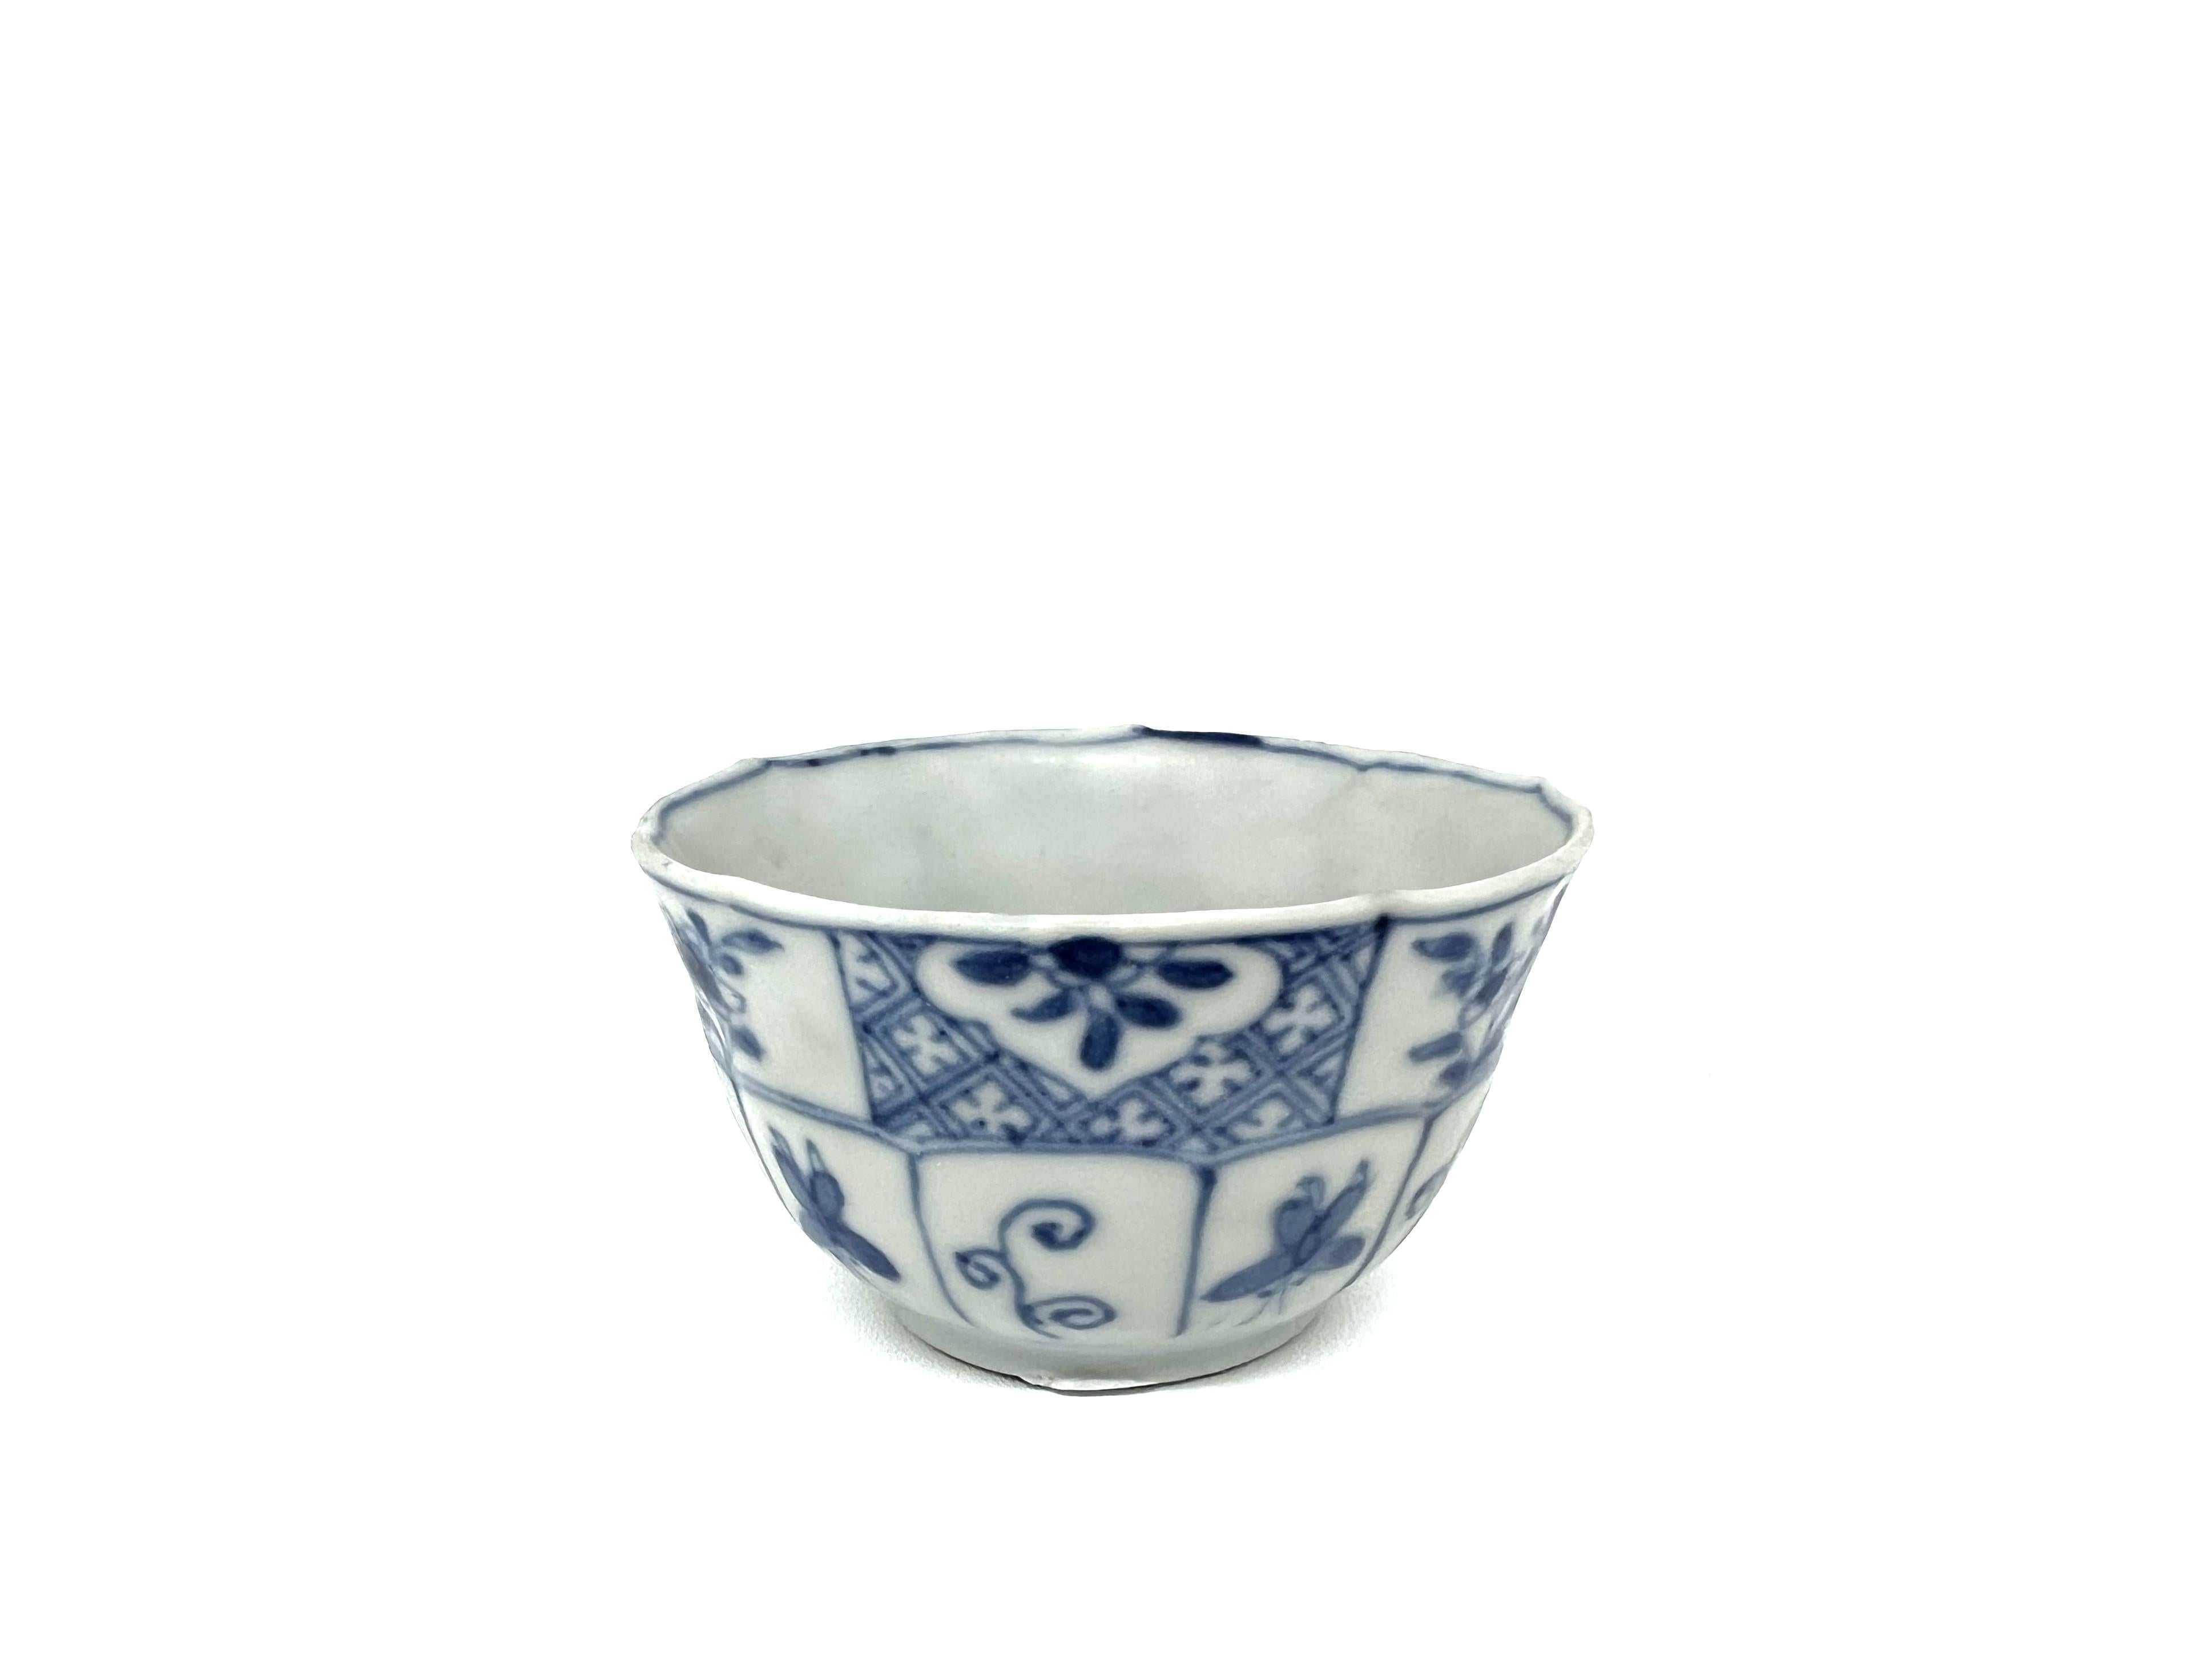 Chinese Blue and White Teabowl, circa 1725, Qing Dynasty, Yongzheng Reign